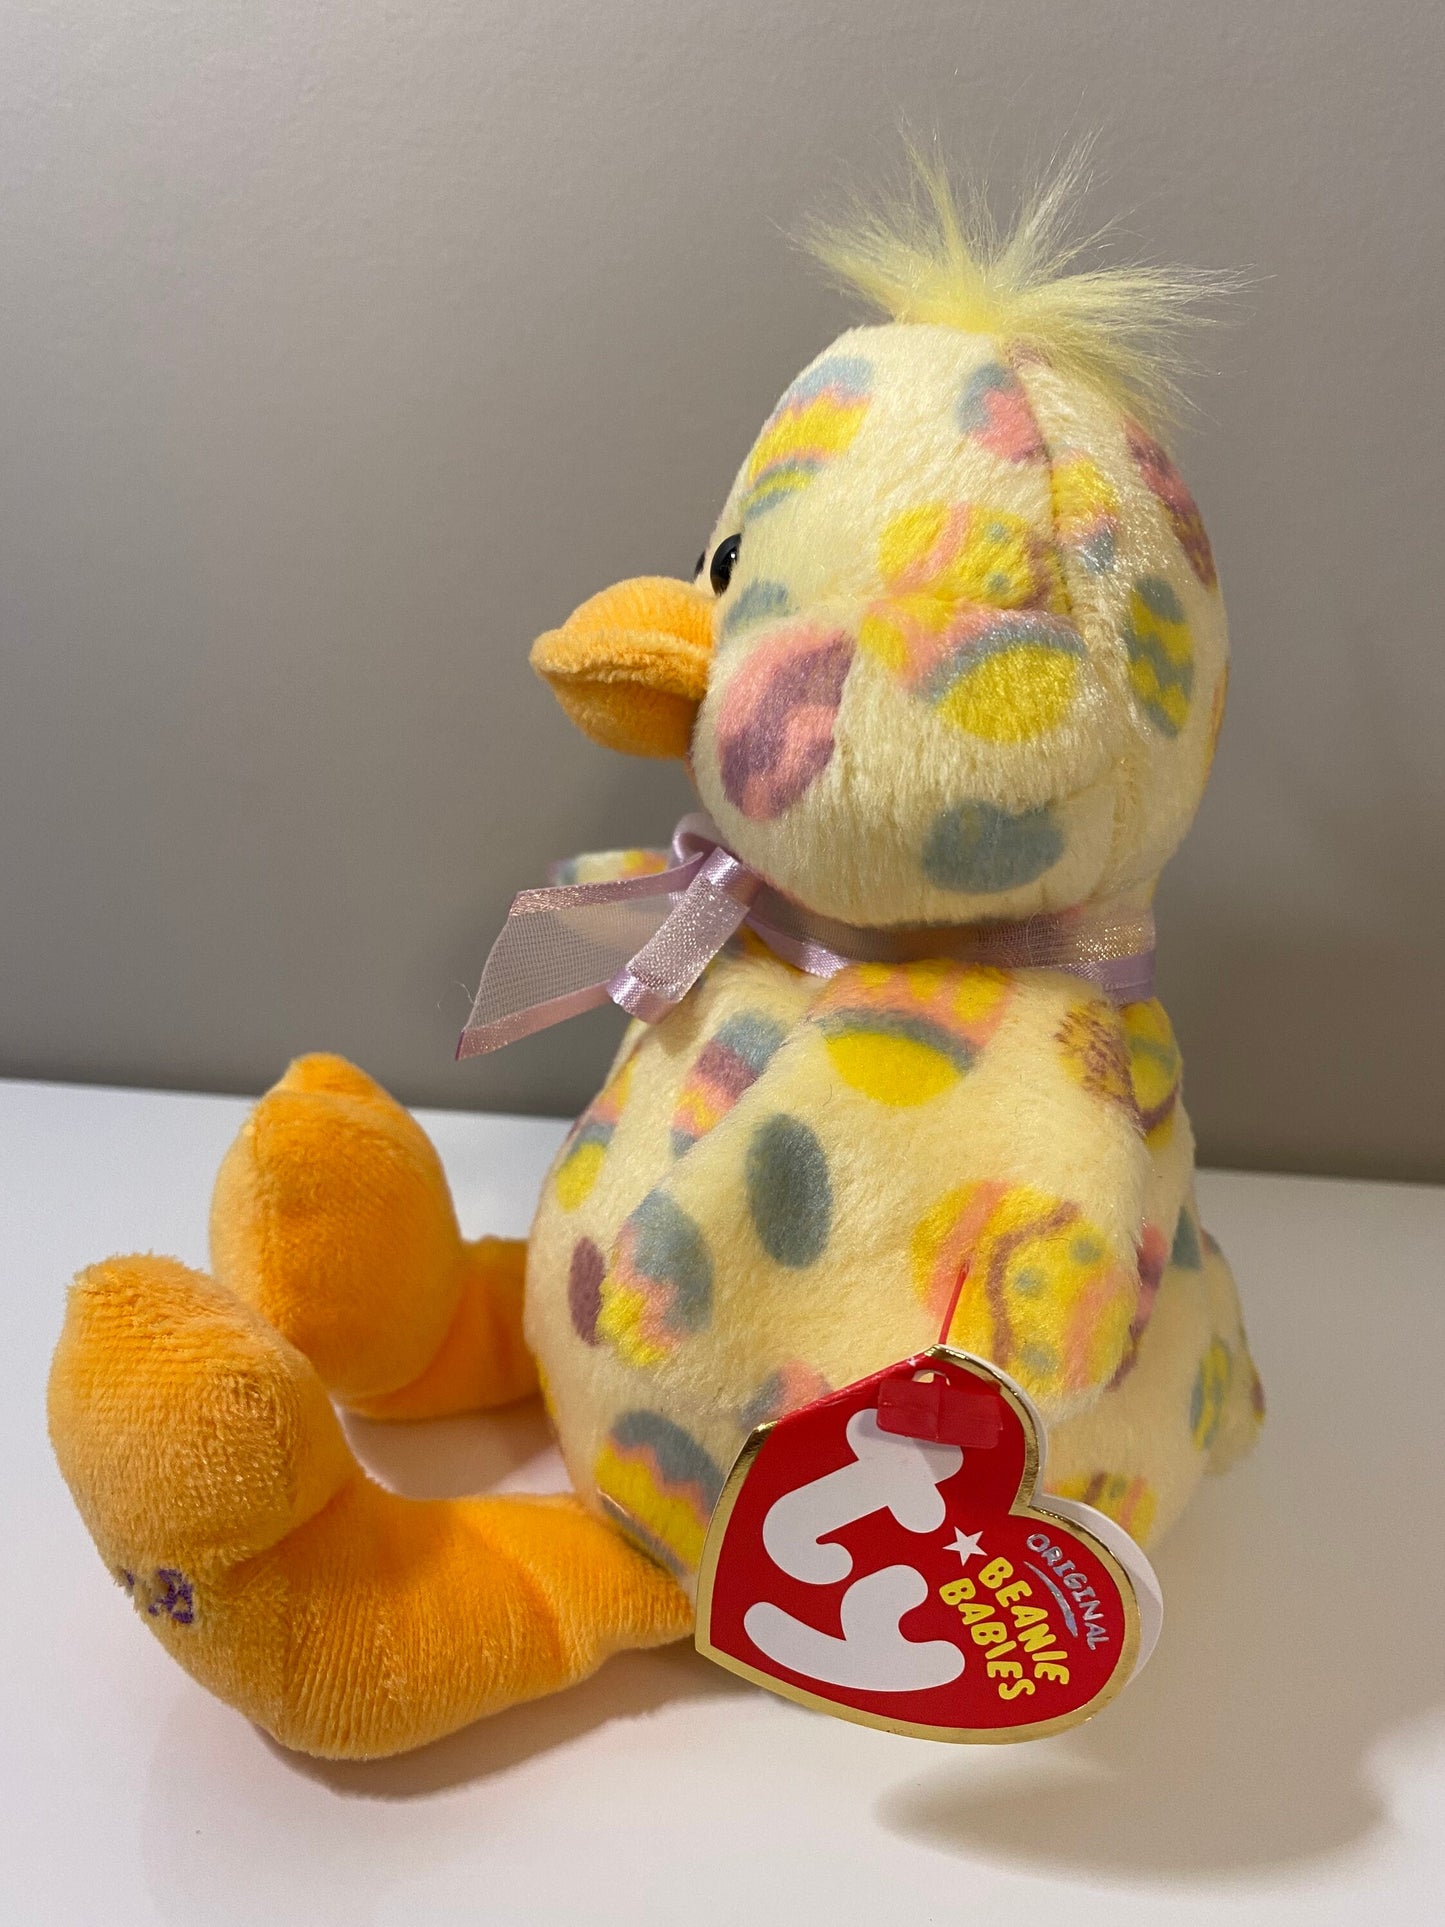 Ty Beanie Baby “Quackington” the Easter Duck! (6 inch)